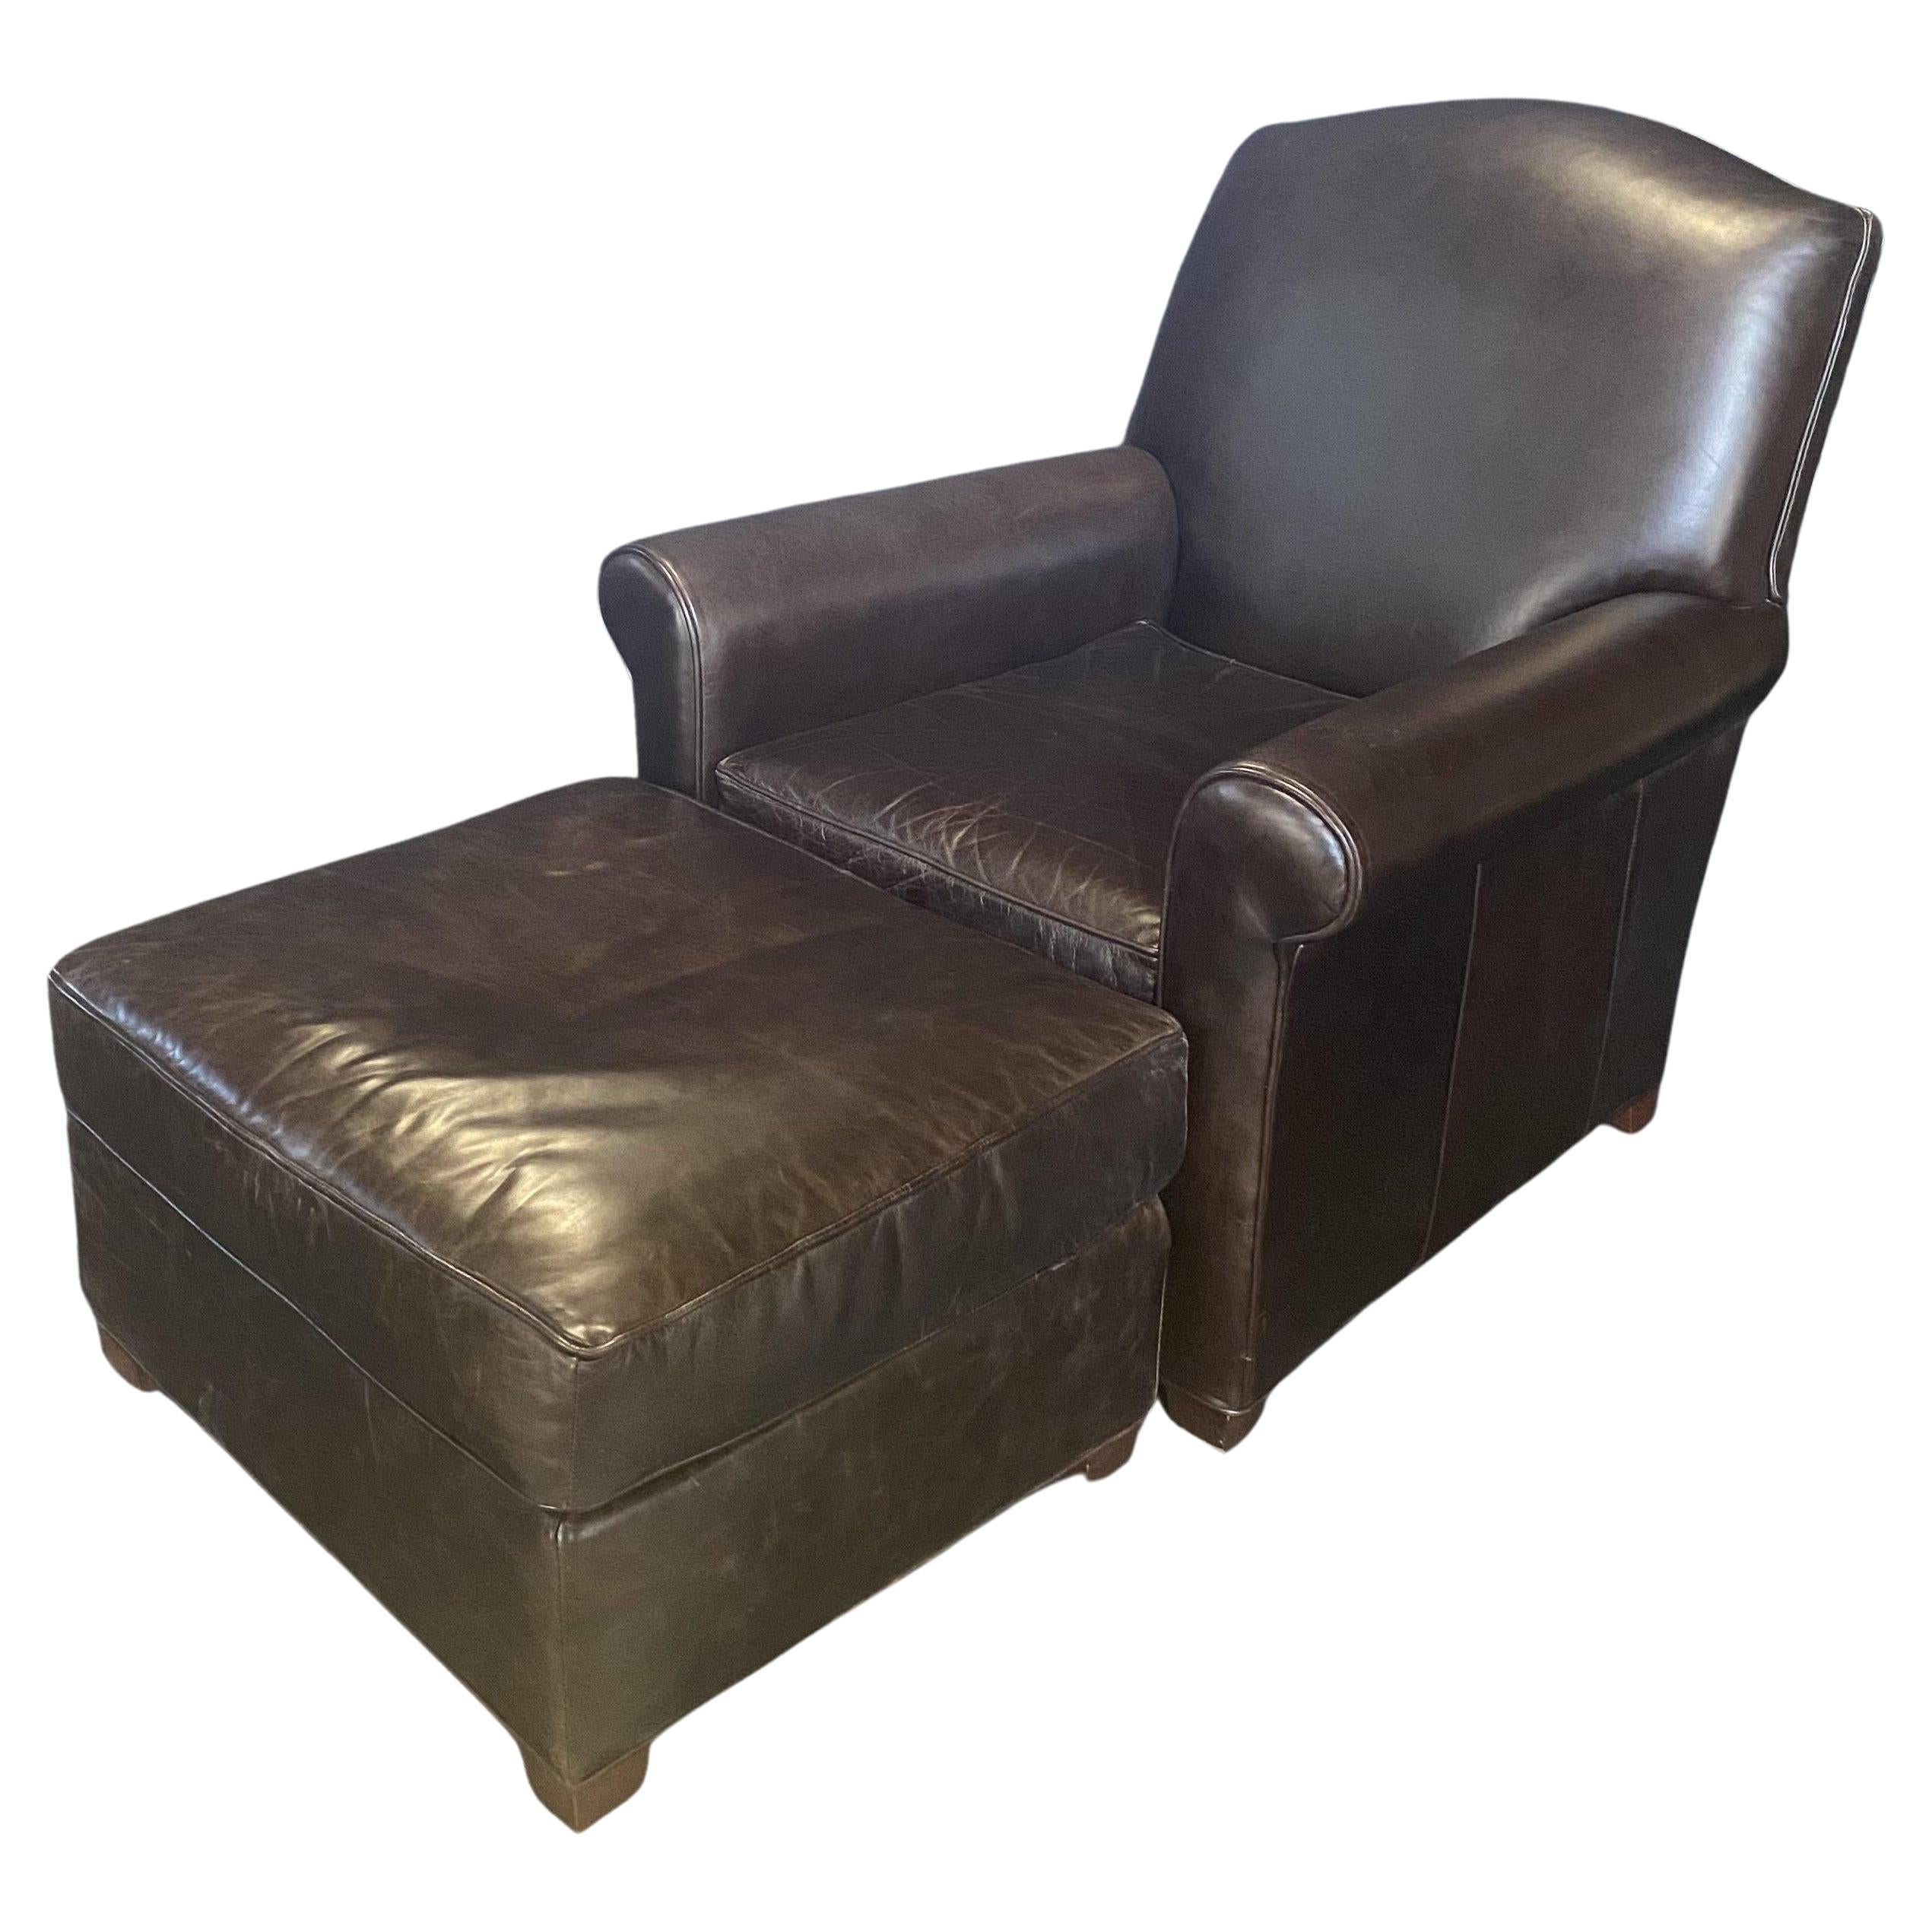 Handsome Tobacco Leather Club Chair with Matching Ottoman